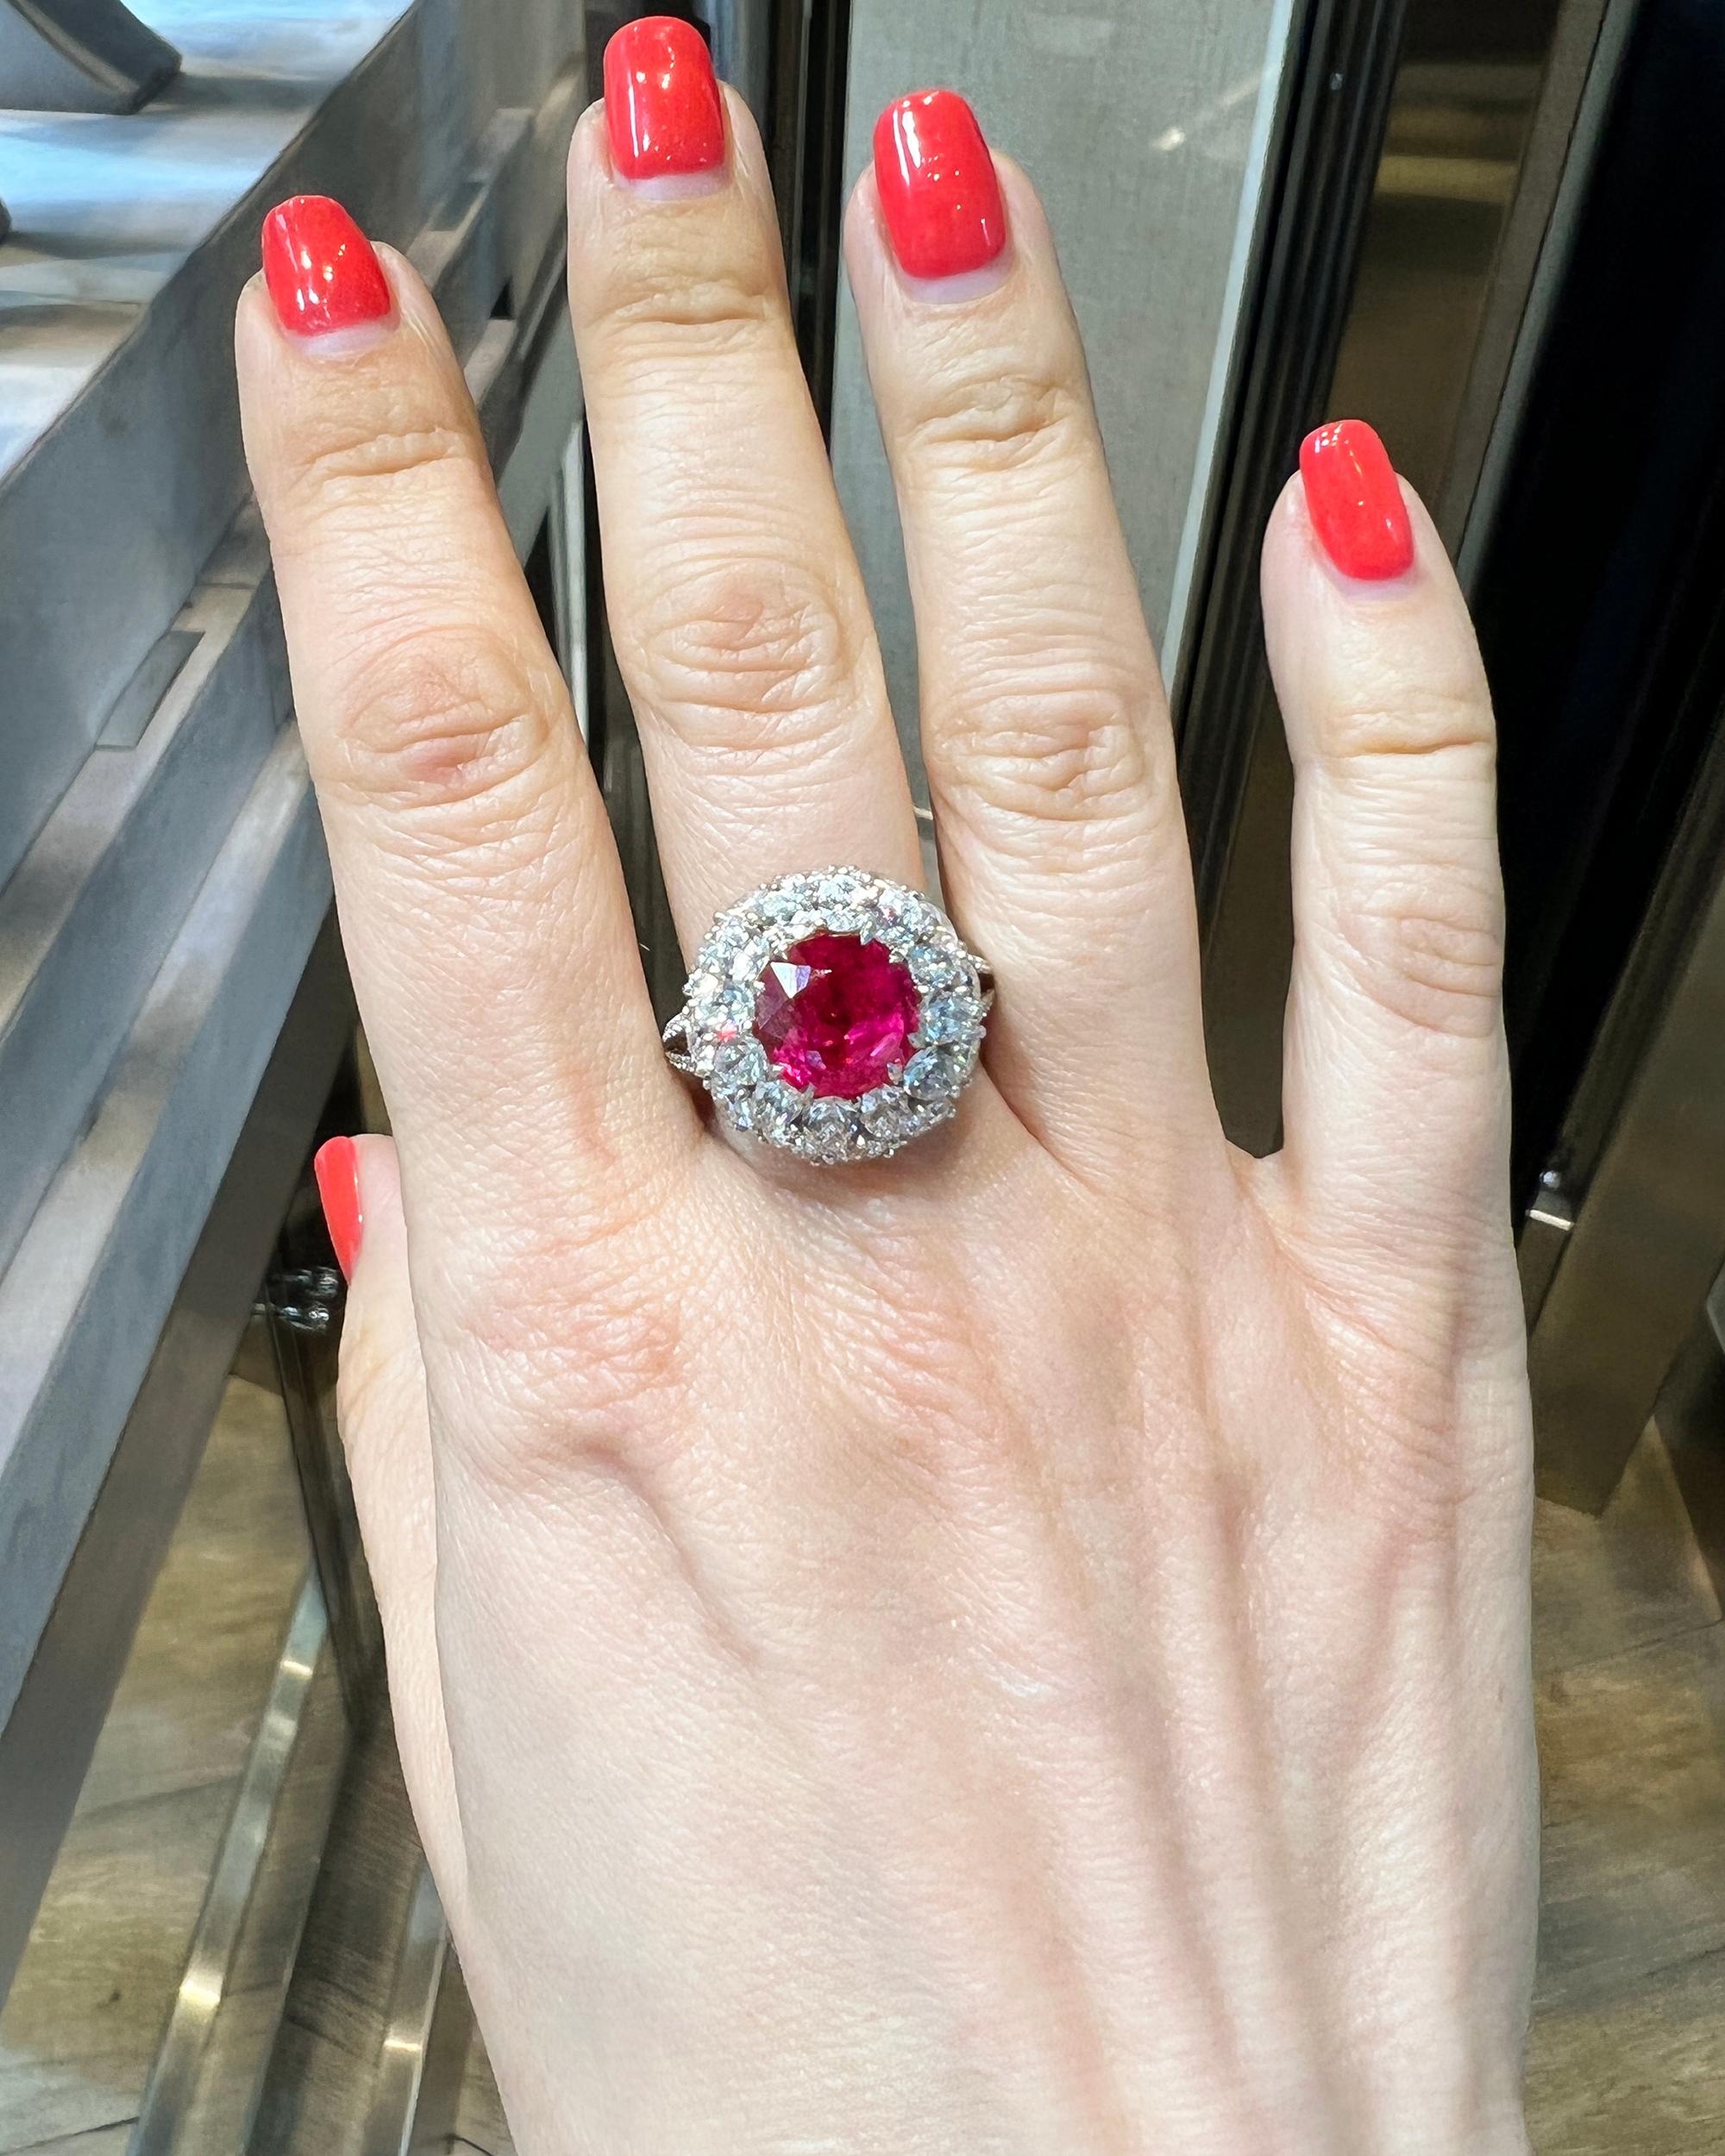 A beautiful cocktail ring featuring a 4.99 cushion ruby accented with diamonds.
The ruby is not certified.
Diamond weights:
12 pear shape diamonds = 2.17 carats.
12 round diamonds = 2.50 carats.
68 pave diamonds = 0.29 carats.
Total weight of